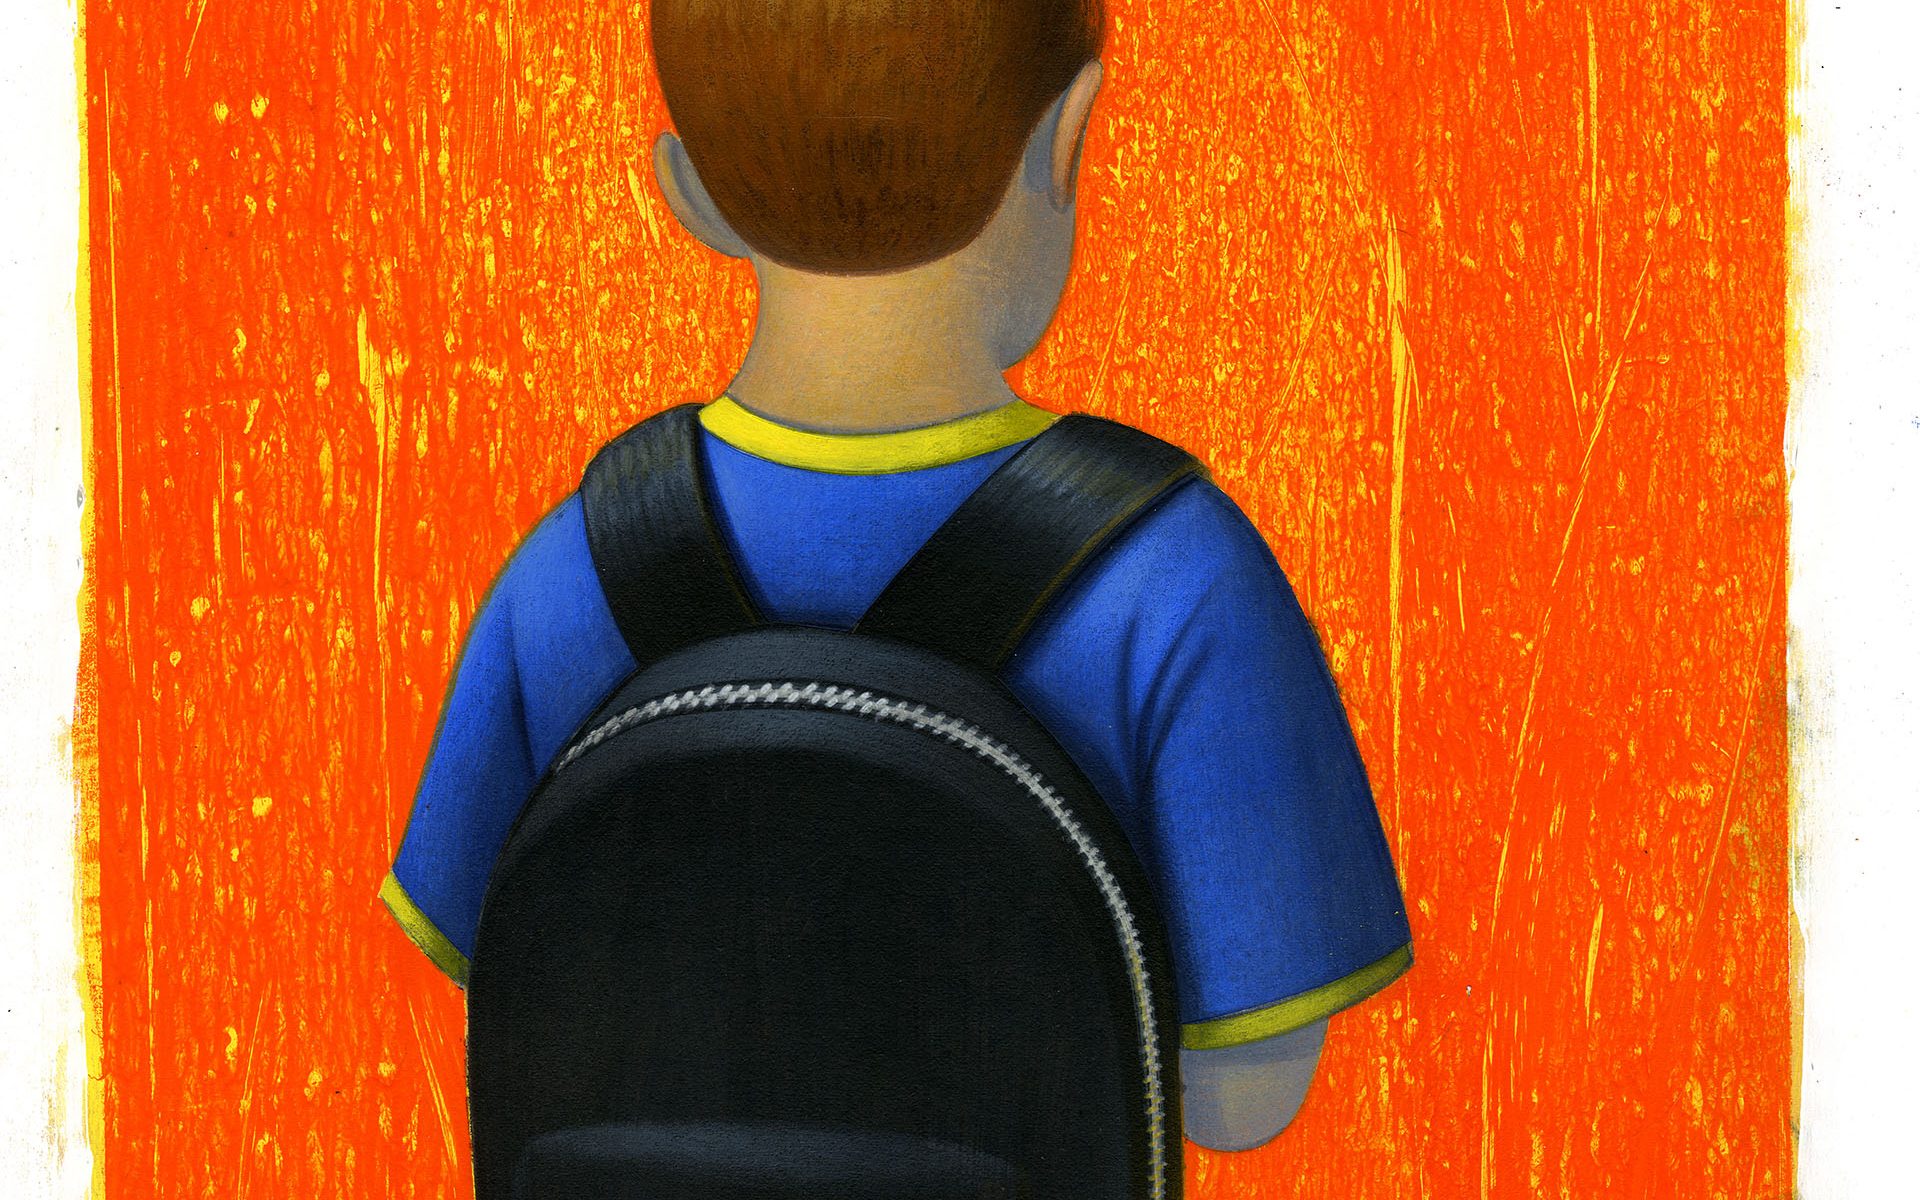 illustration of young boy with backpack facing away, against orange background